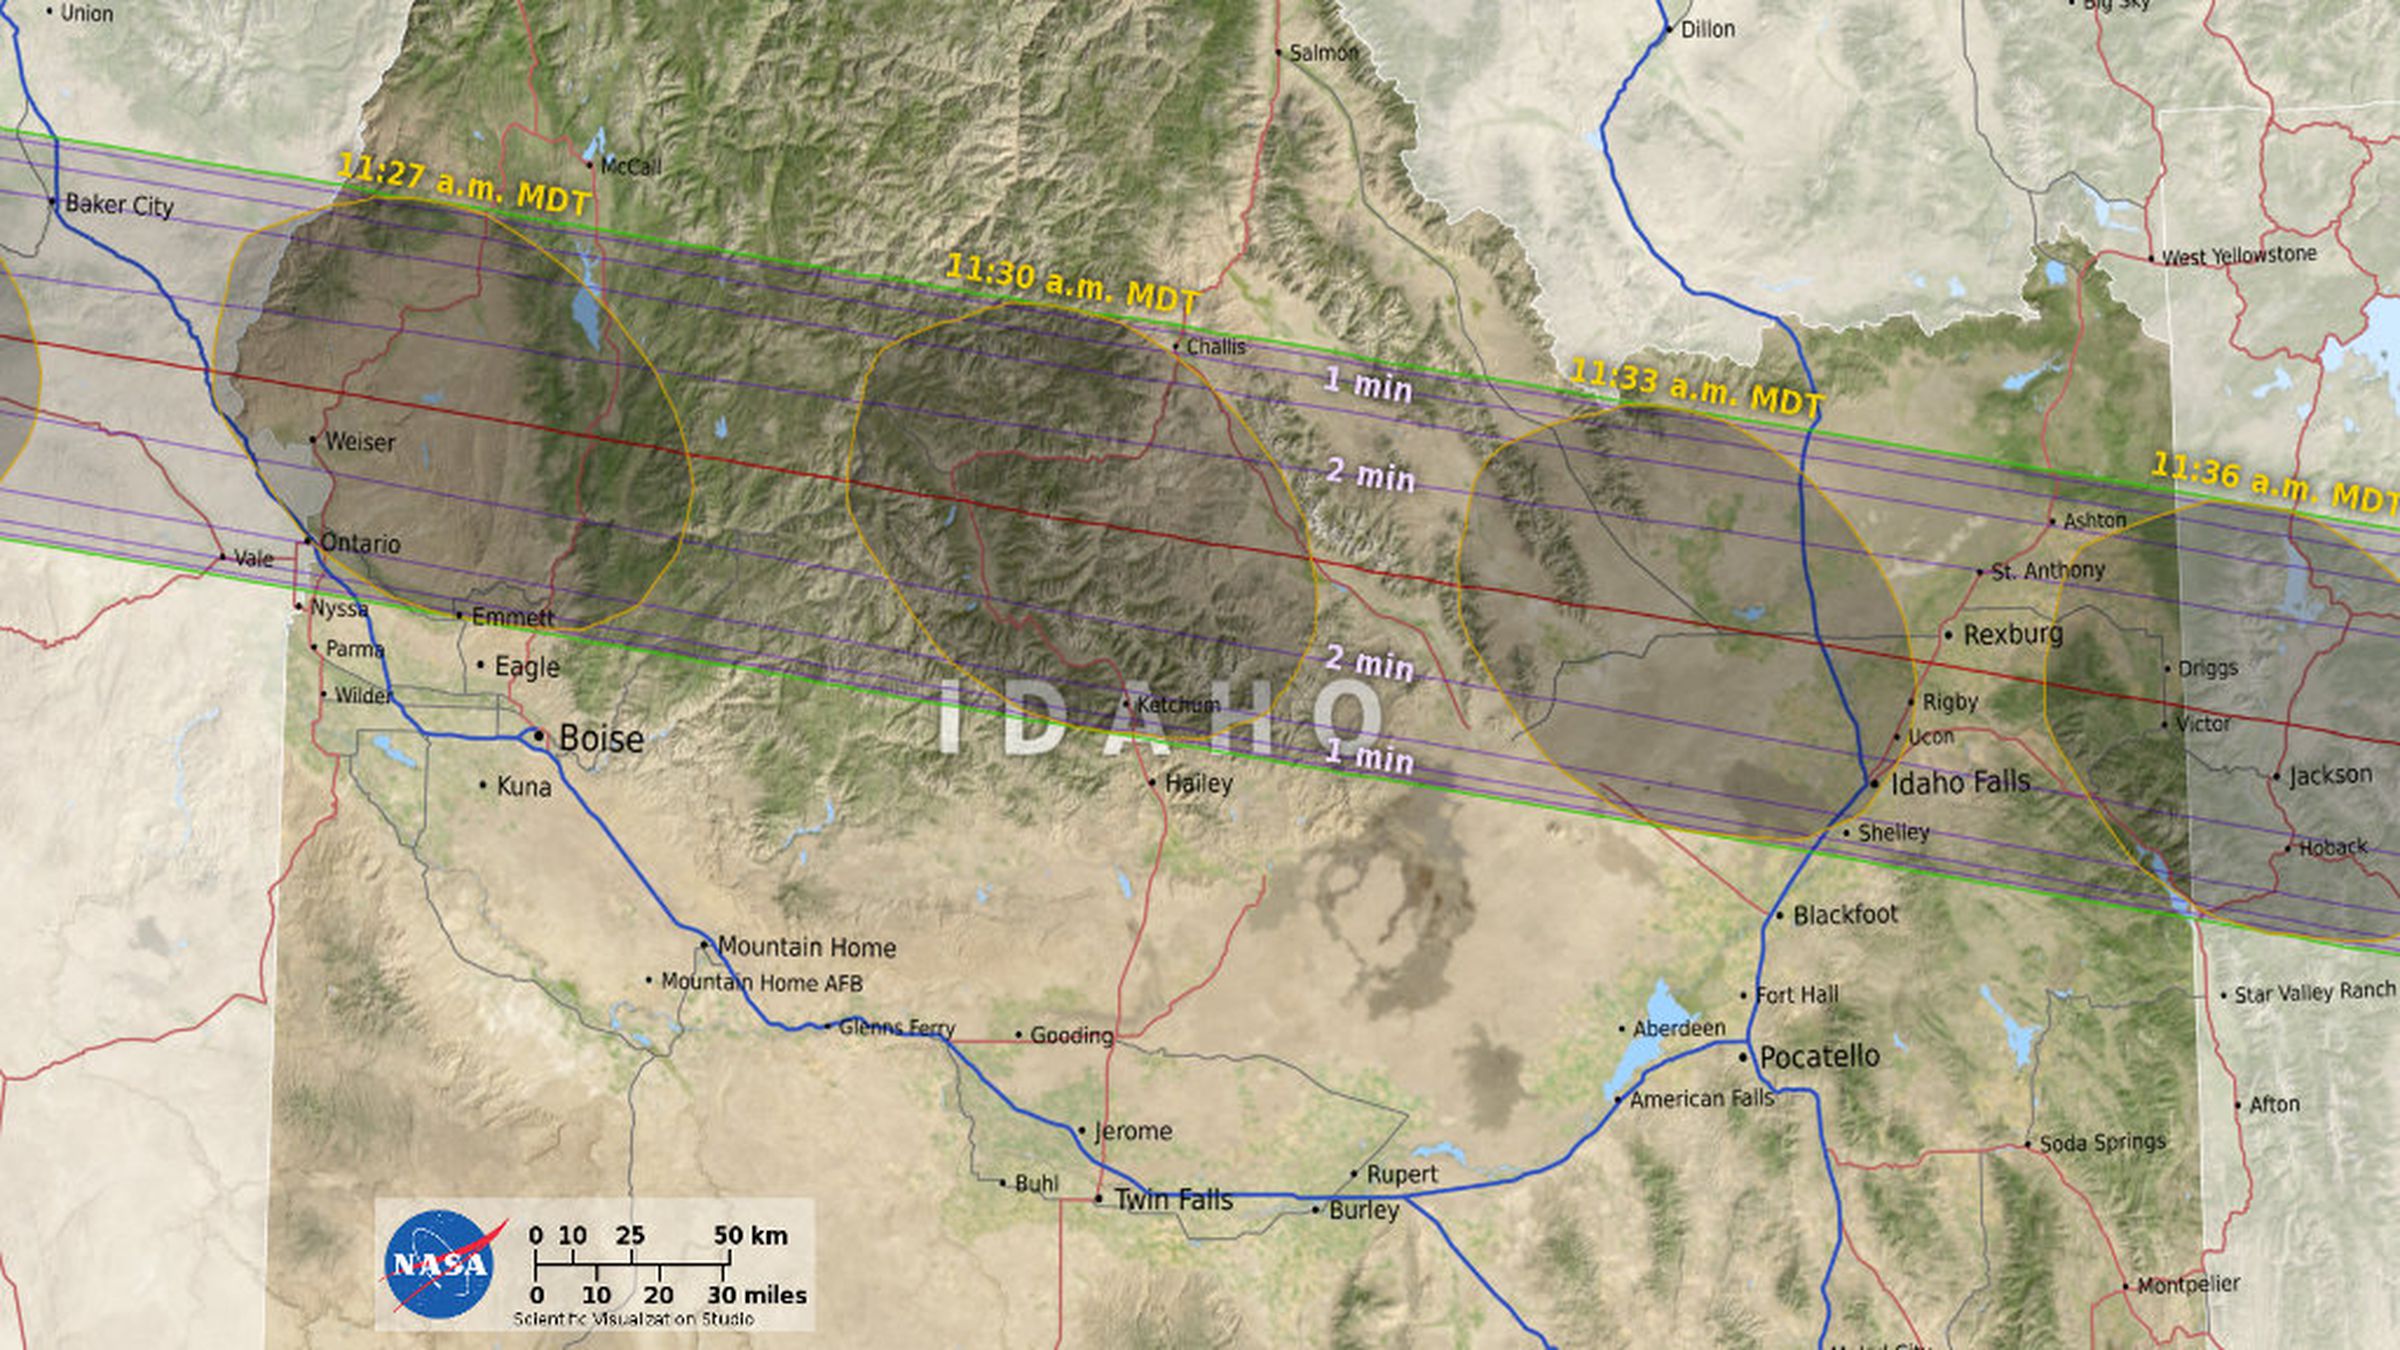 The path of totality over Idaho.